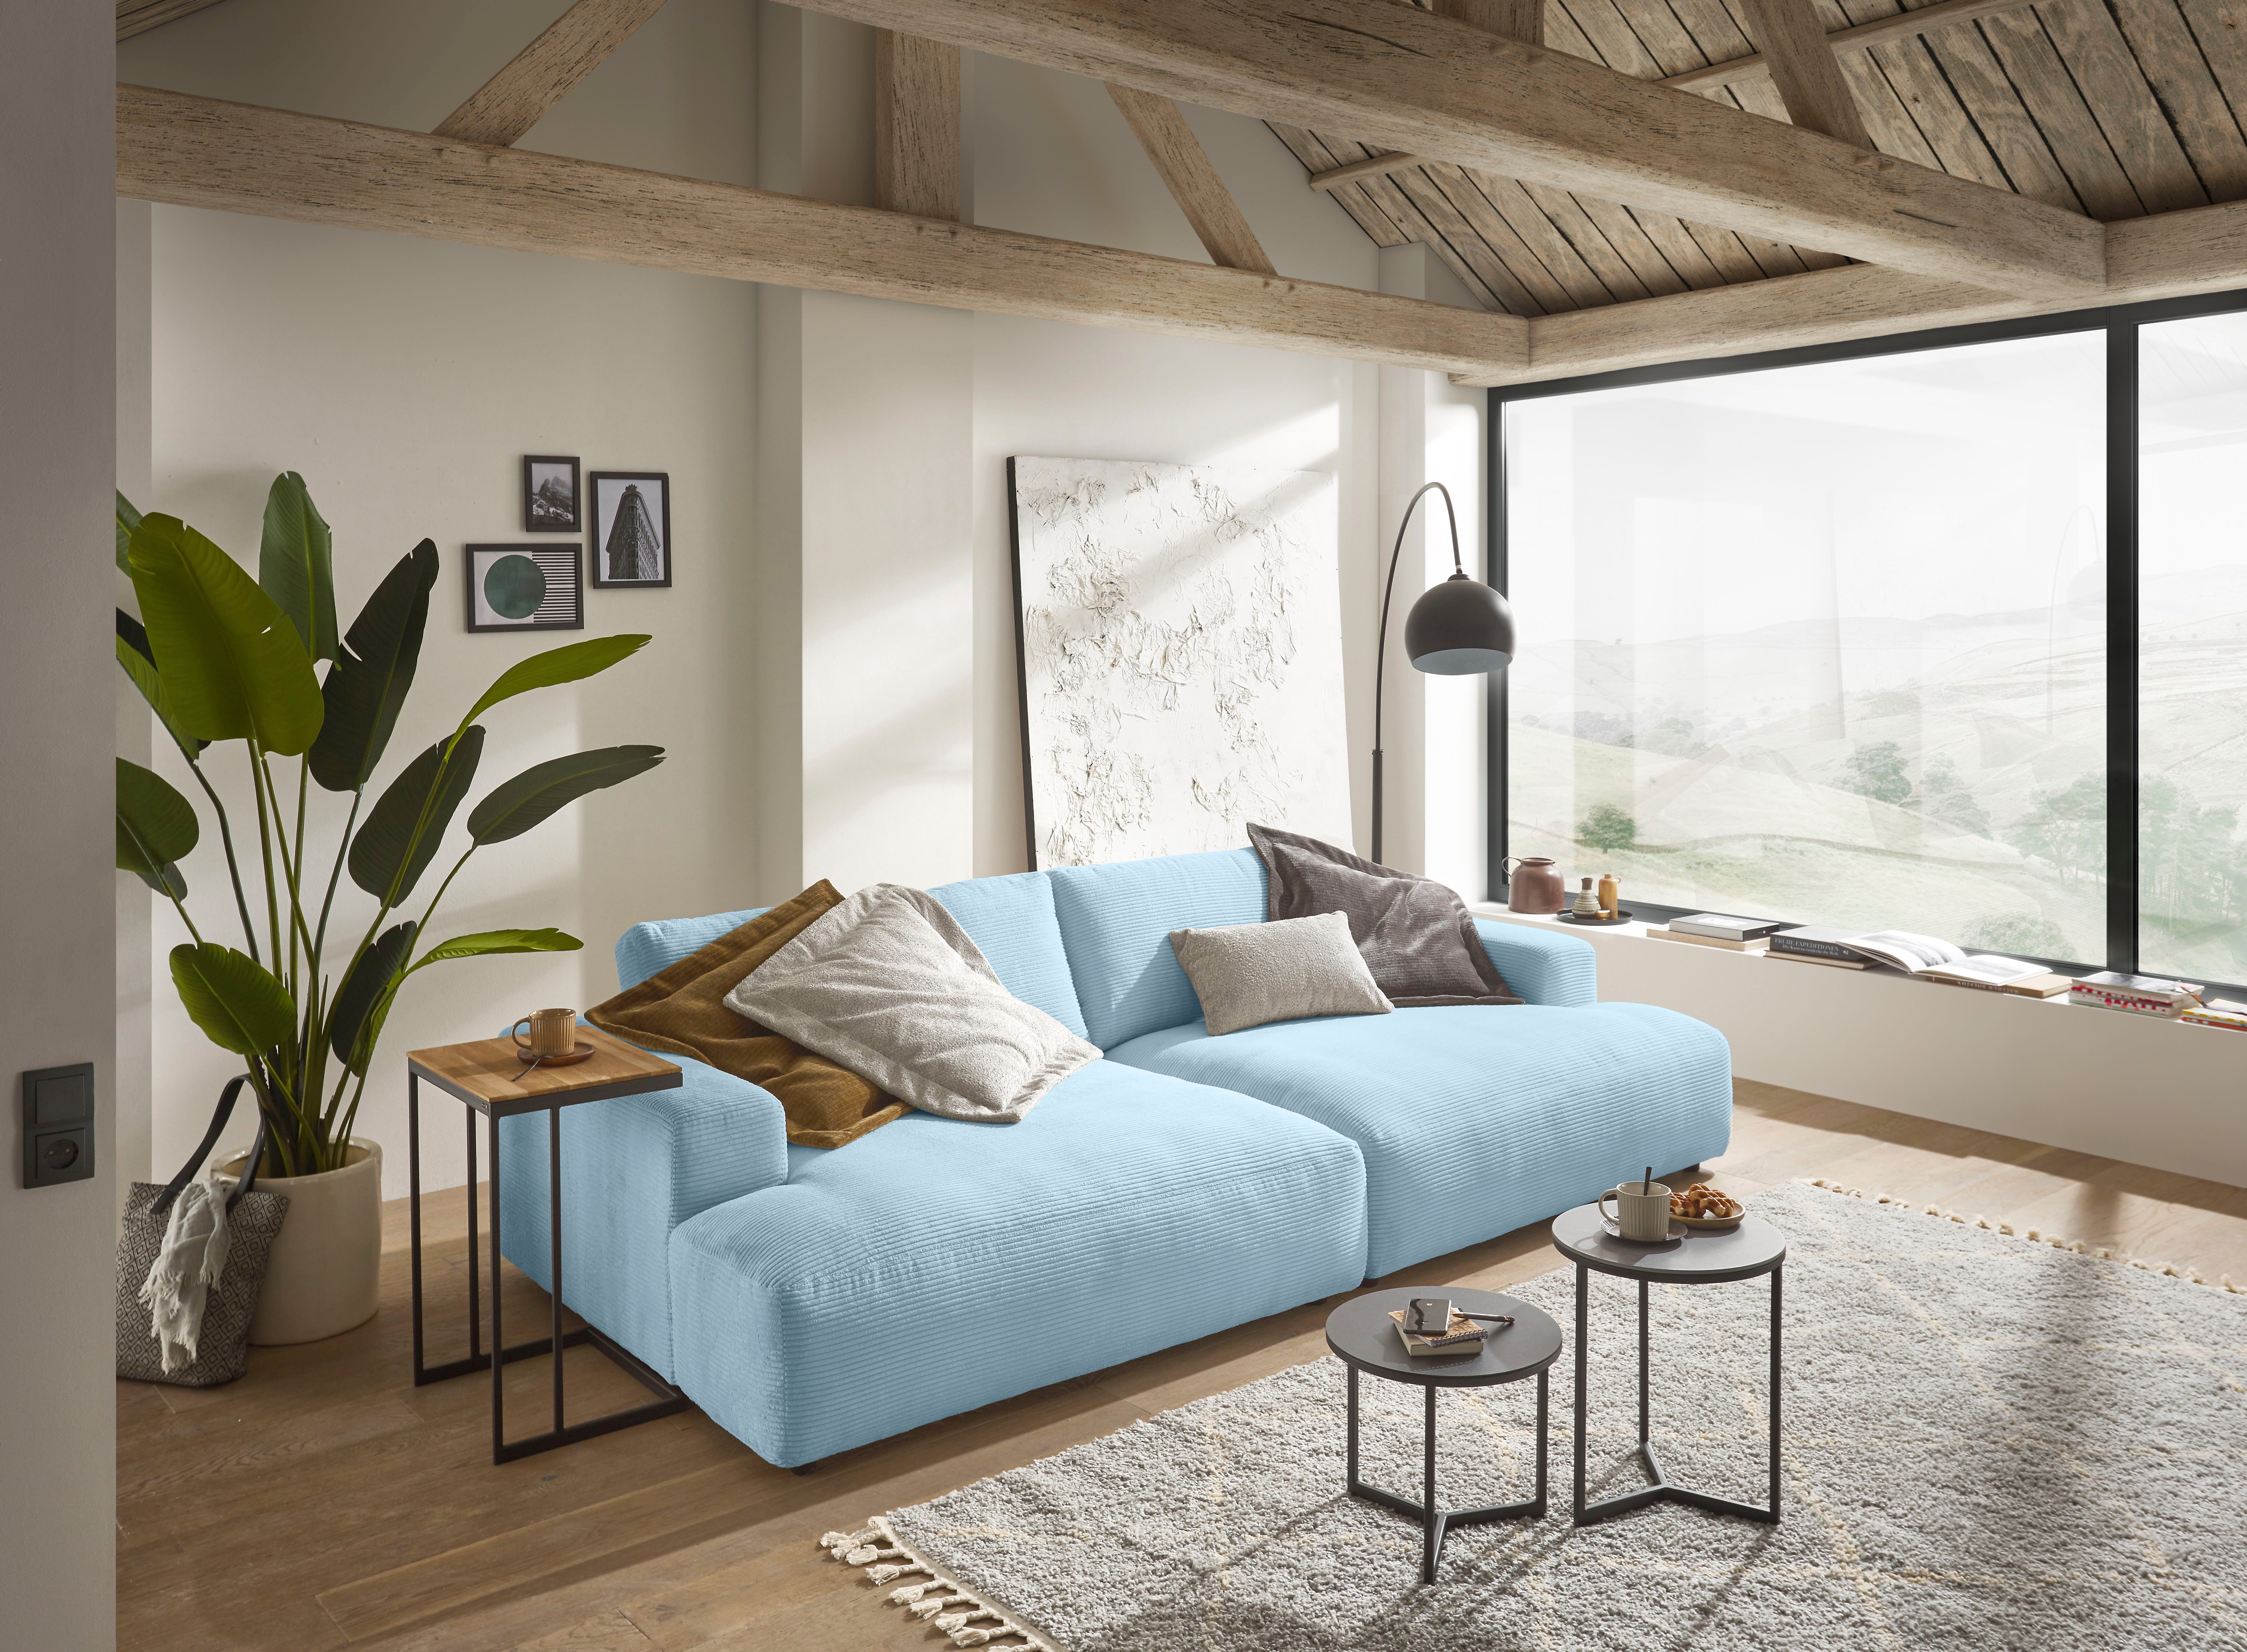 GALLERY M branded Loungesofa 292 cm by Breite light-blue Lucia, Cord-Bezug, Musterring